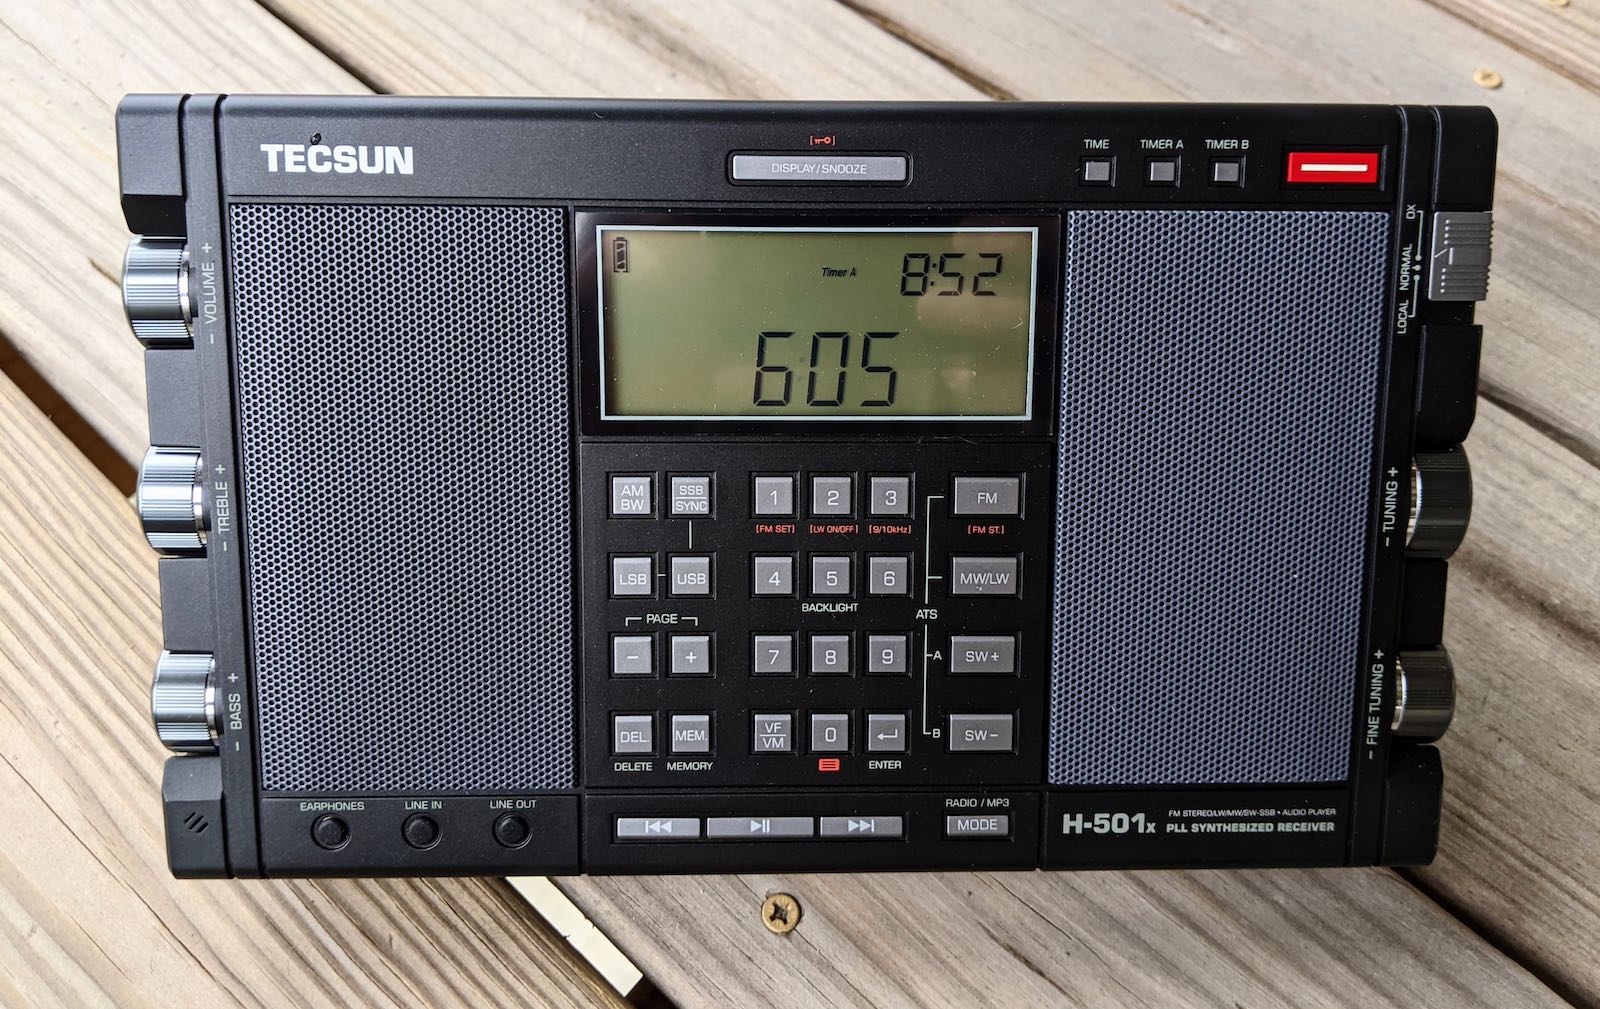 A Review Of The Tecsun H 501x Portable Shortwave Radio Receiver Swling Post